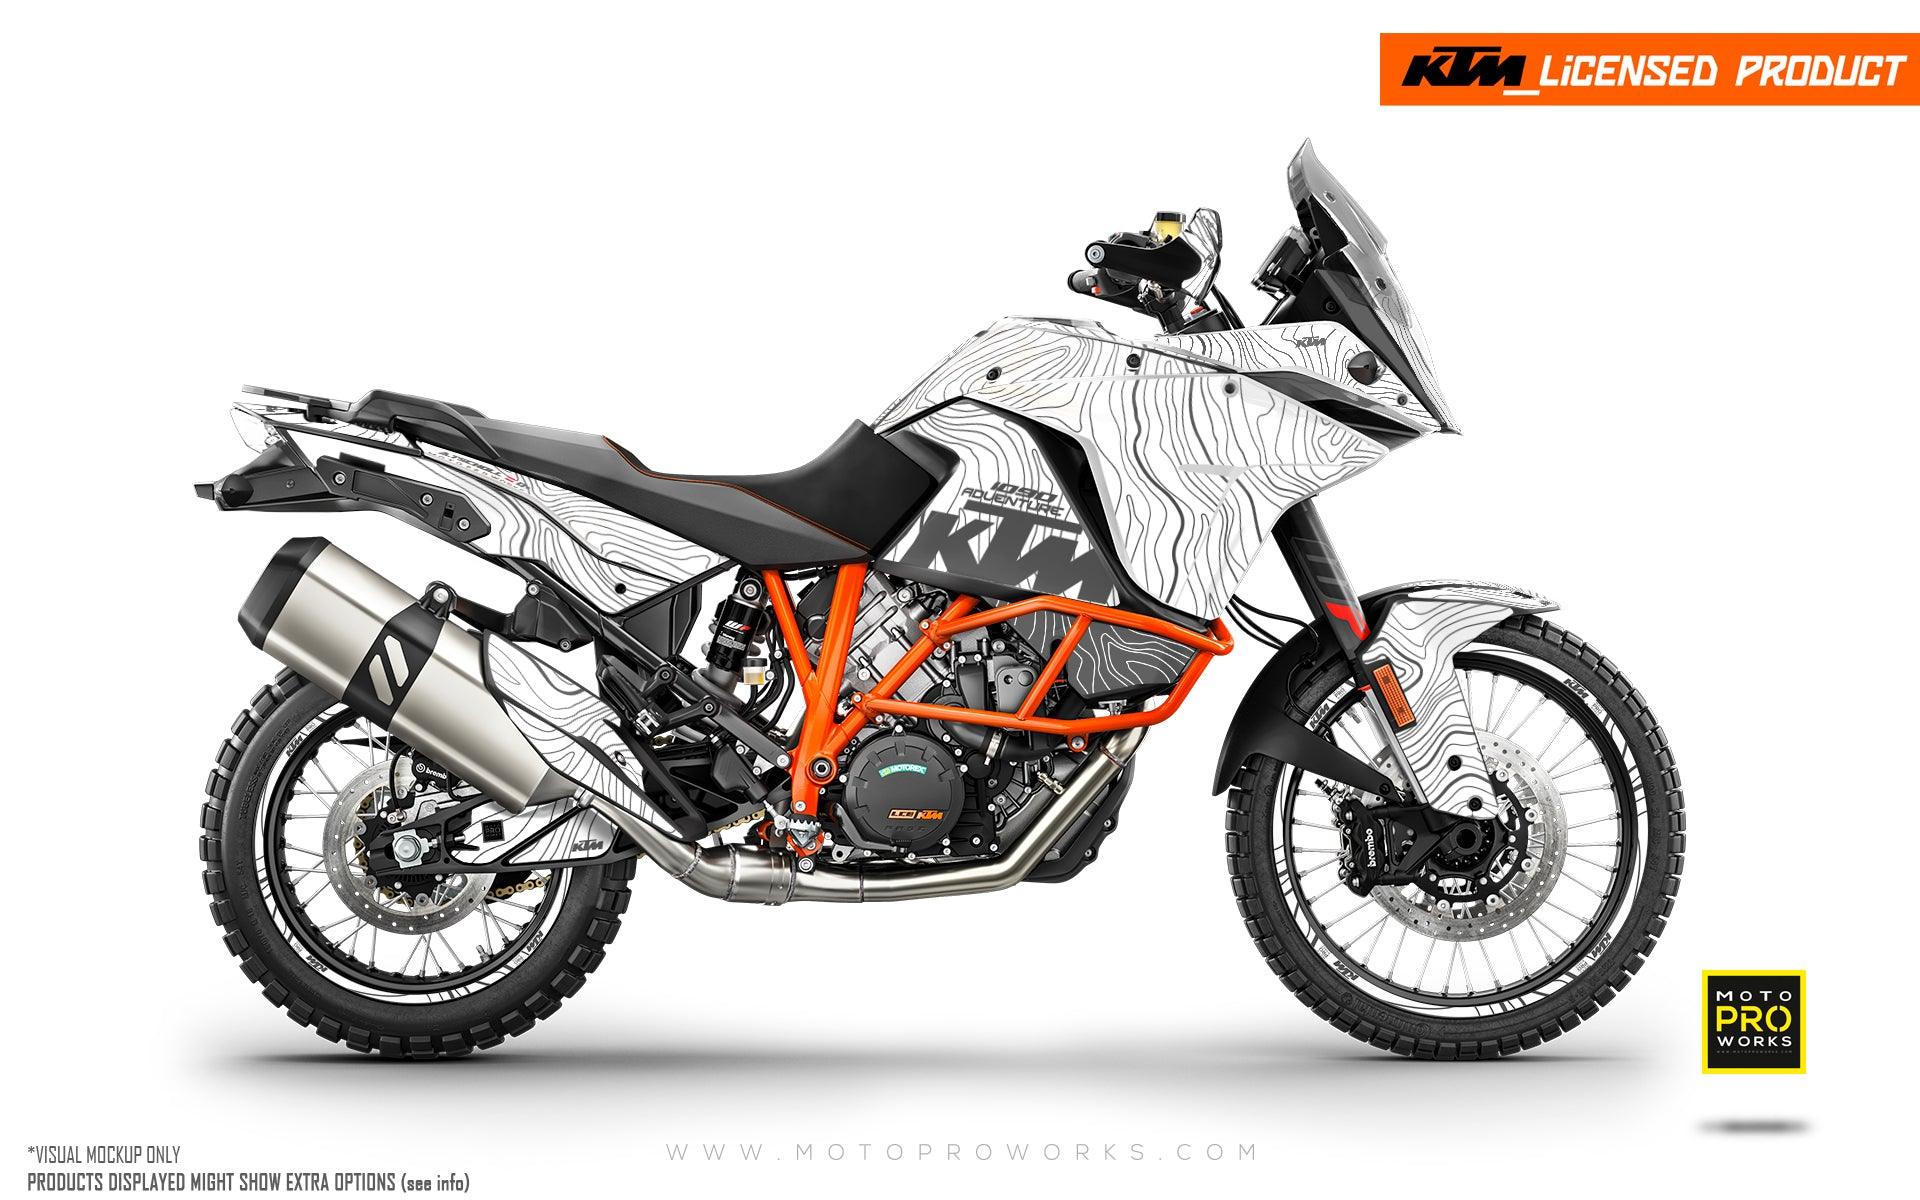 KTM 1050/1090/1190 Adventure GRAPHICS - "TOPOGRAPHY" (White) - MotoProWorks